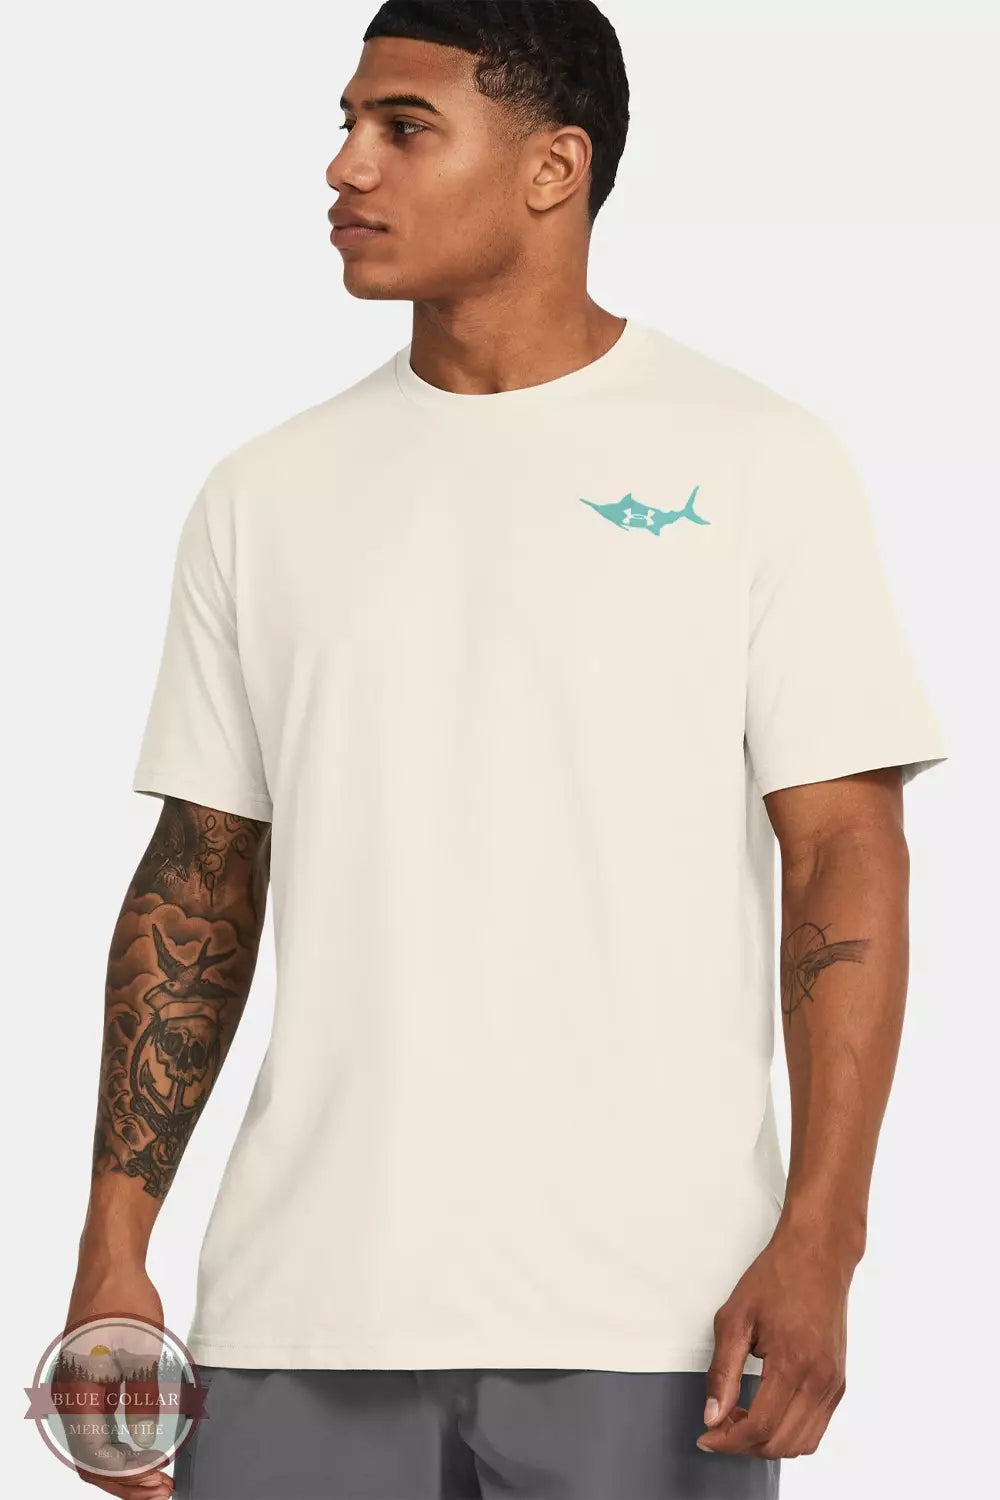 Under Armour 1382907-273 Marlin Short Sleeve T-Shirt in Silt Front View